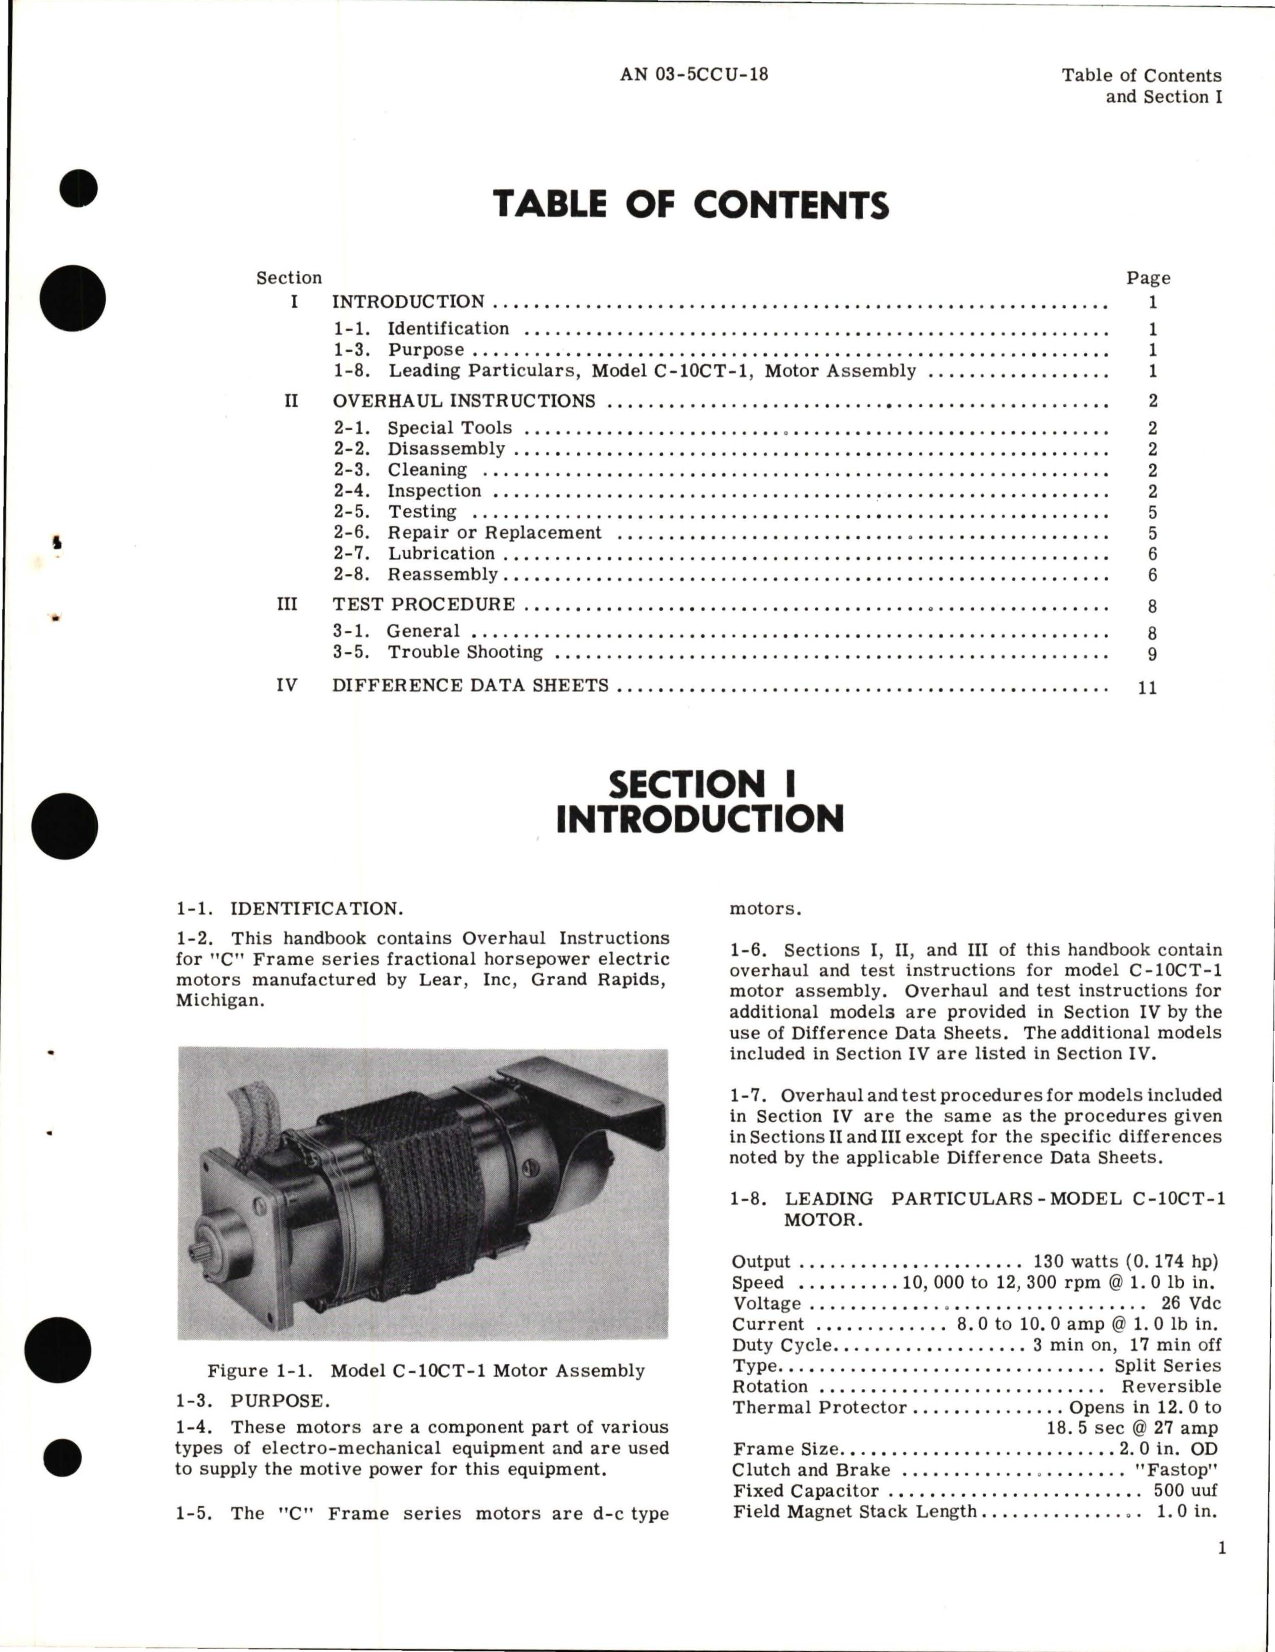 Sample page 5 from AirCorps Library document: Overhaul Instructions for Fractional Horsepower Electric Motors - C Frame Series 